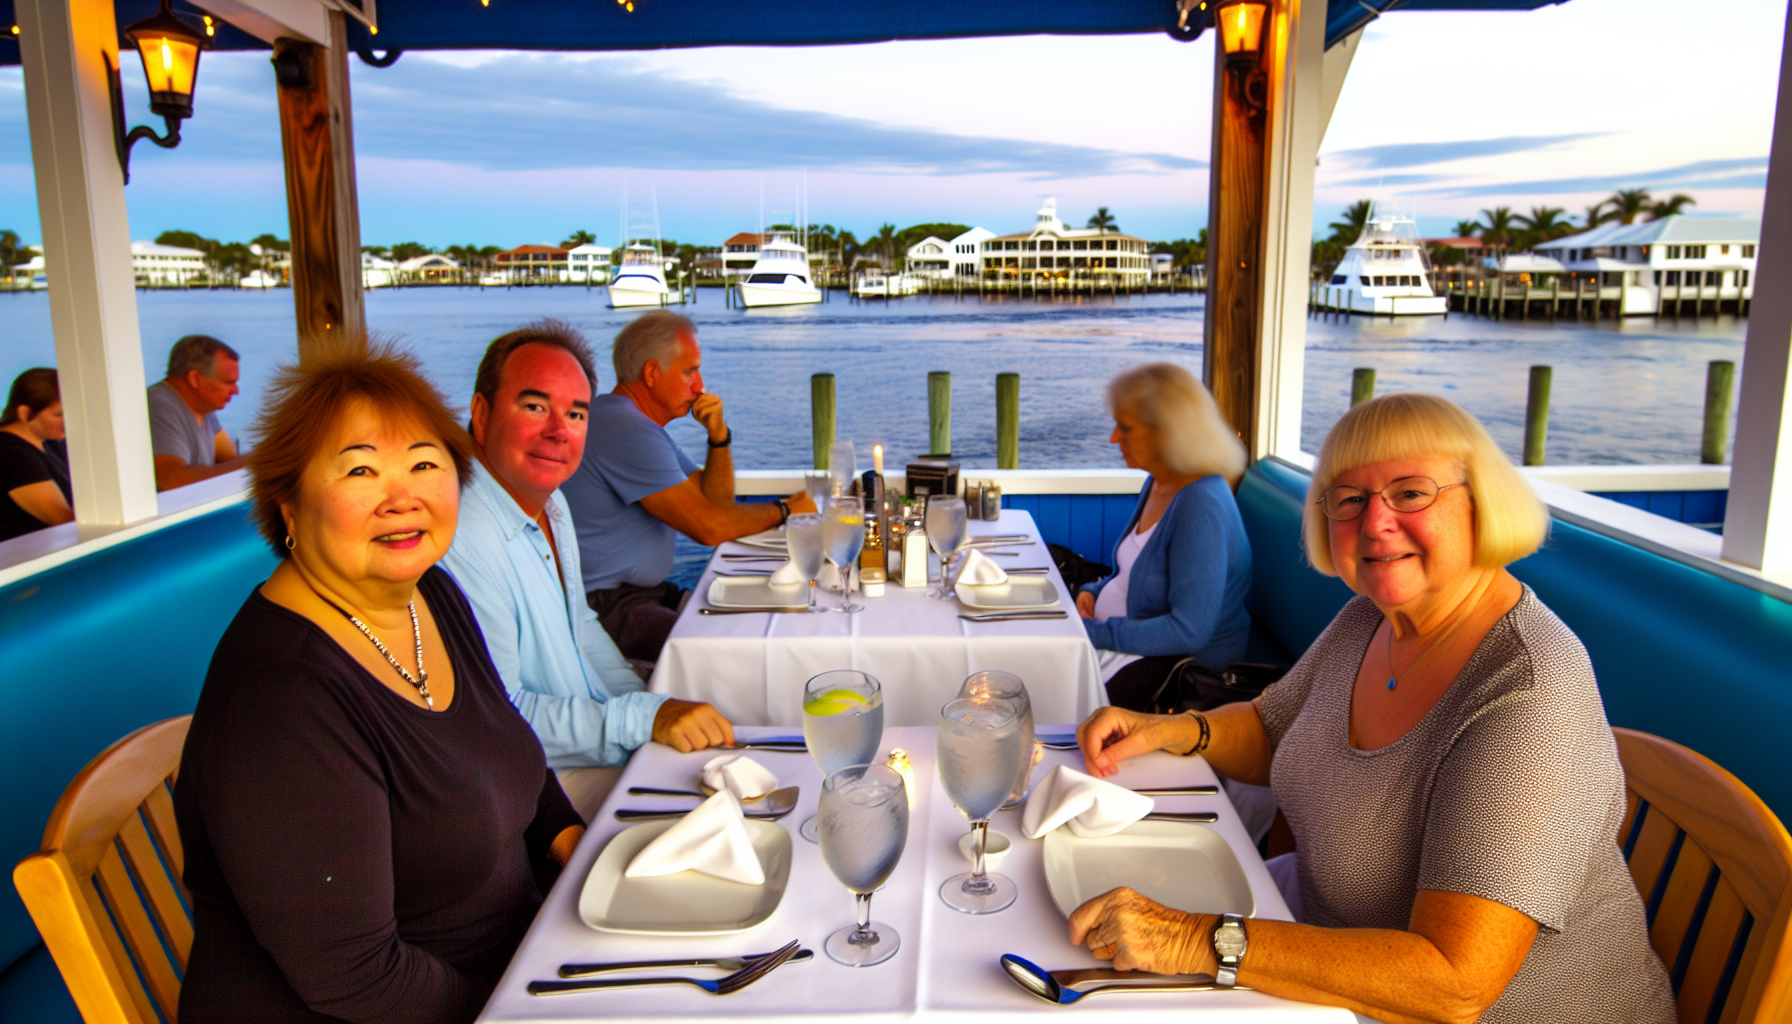 Dining experience at Blue Moon Fish Co. on the Intracoastal Waterway